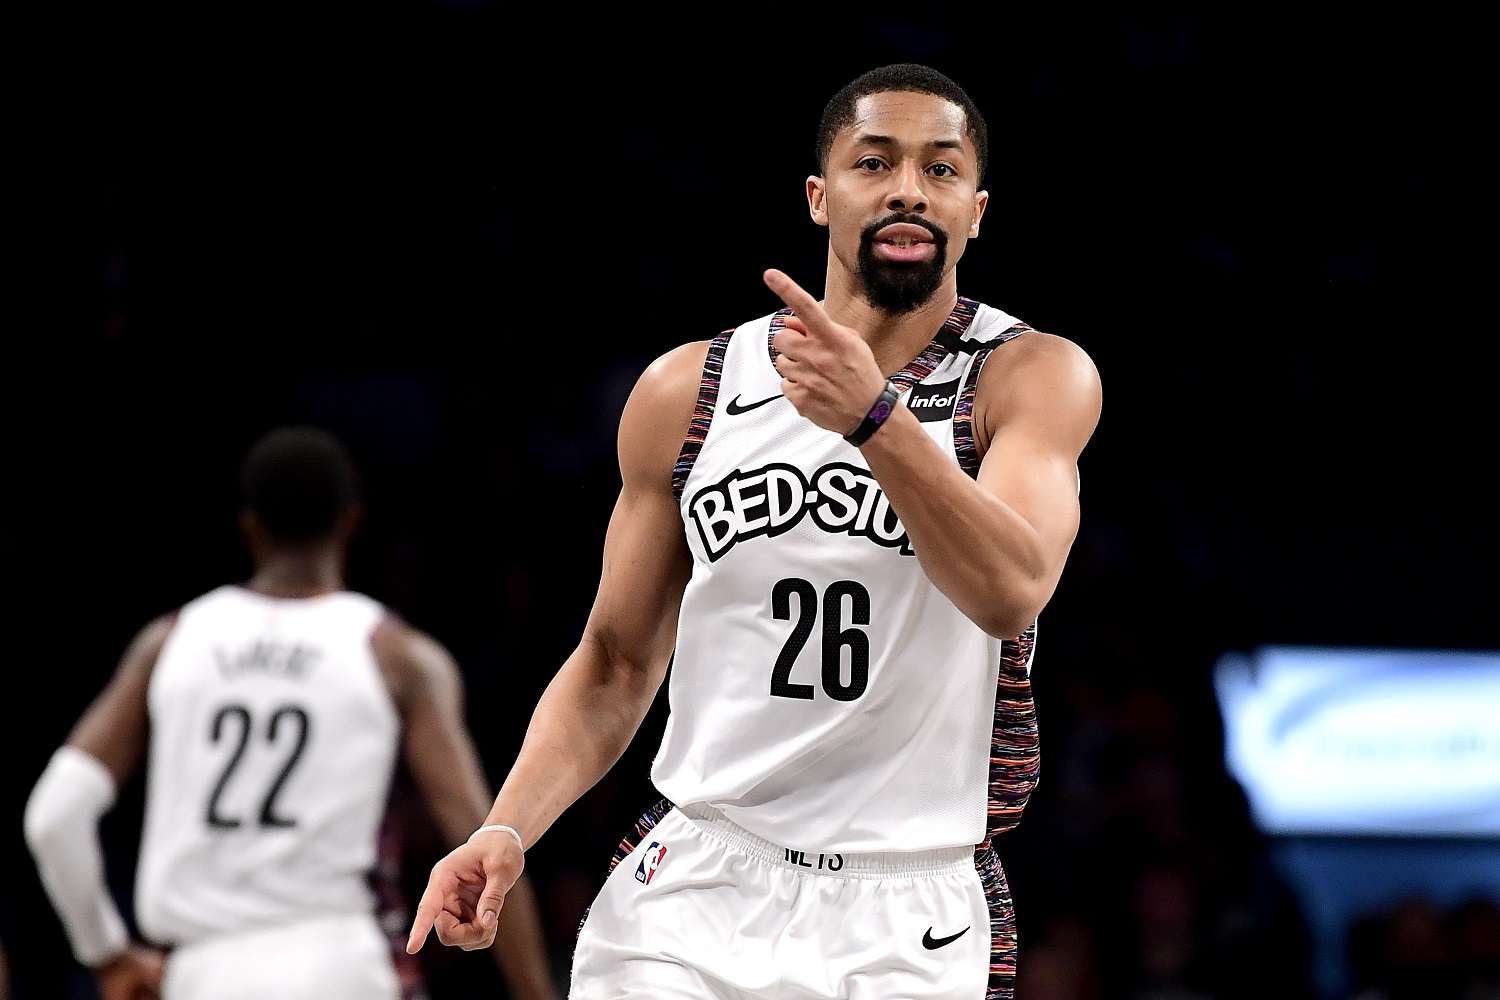 Spencer Dinwiddie of the Brooklyn Nets reacts against the Chicago Bulls in the second half at Barclays Center on March 8, 2020.